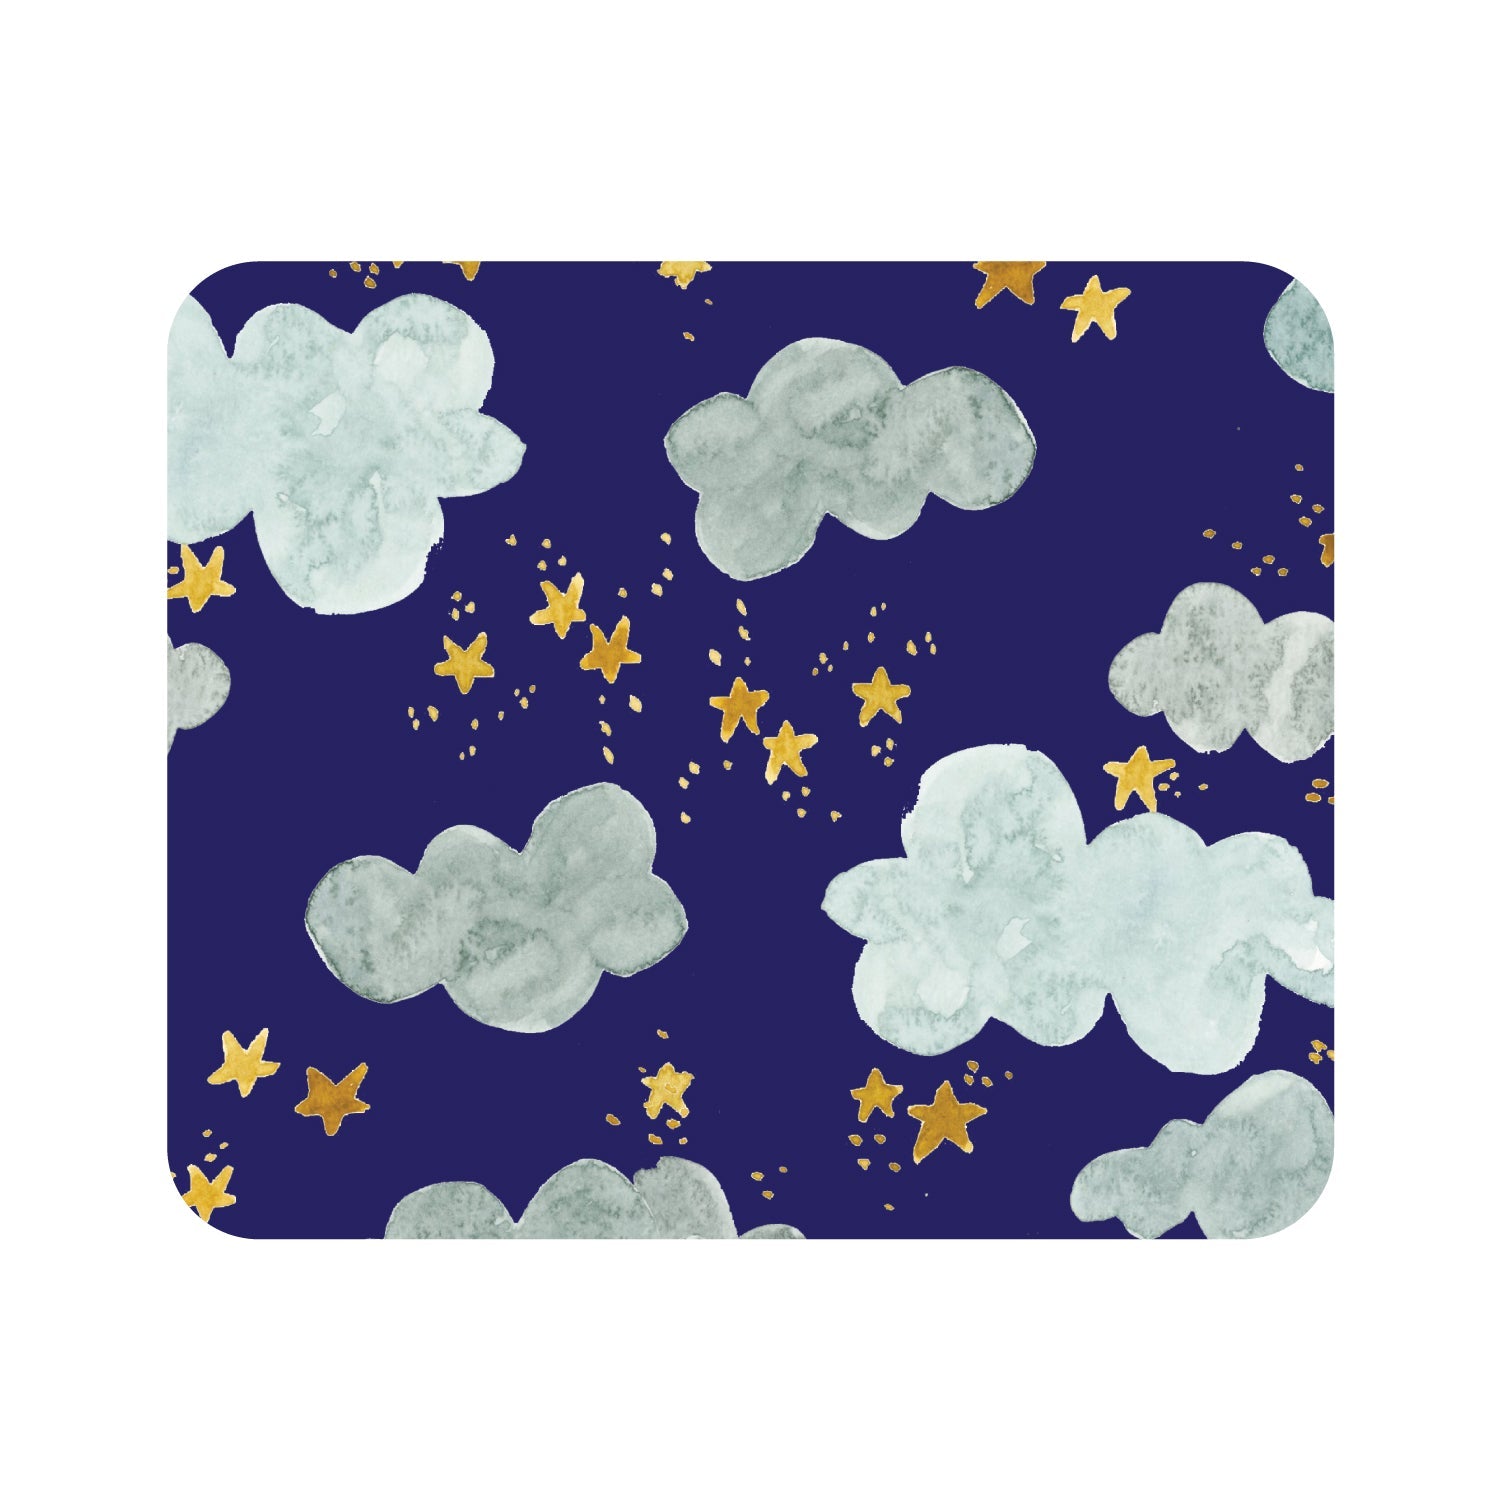 OTM Essentials Navy Blue Mousepad, Clouds and Stars